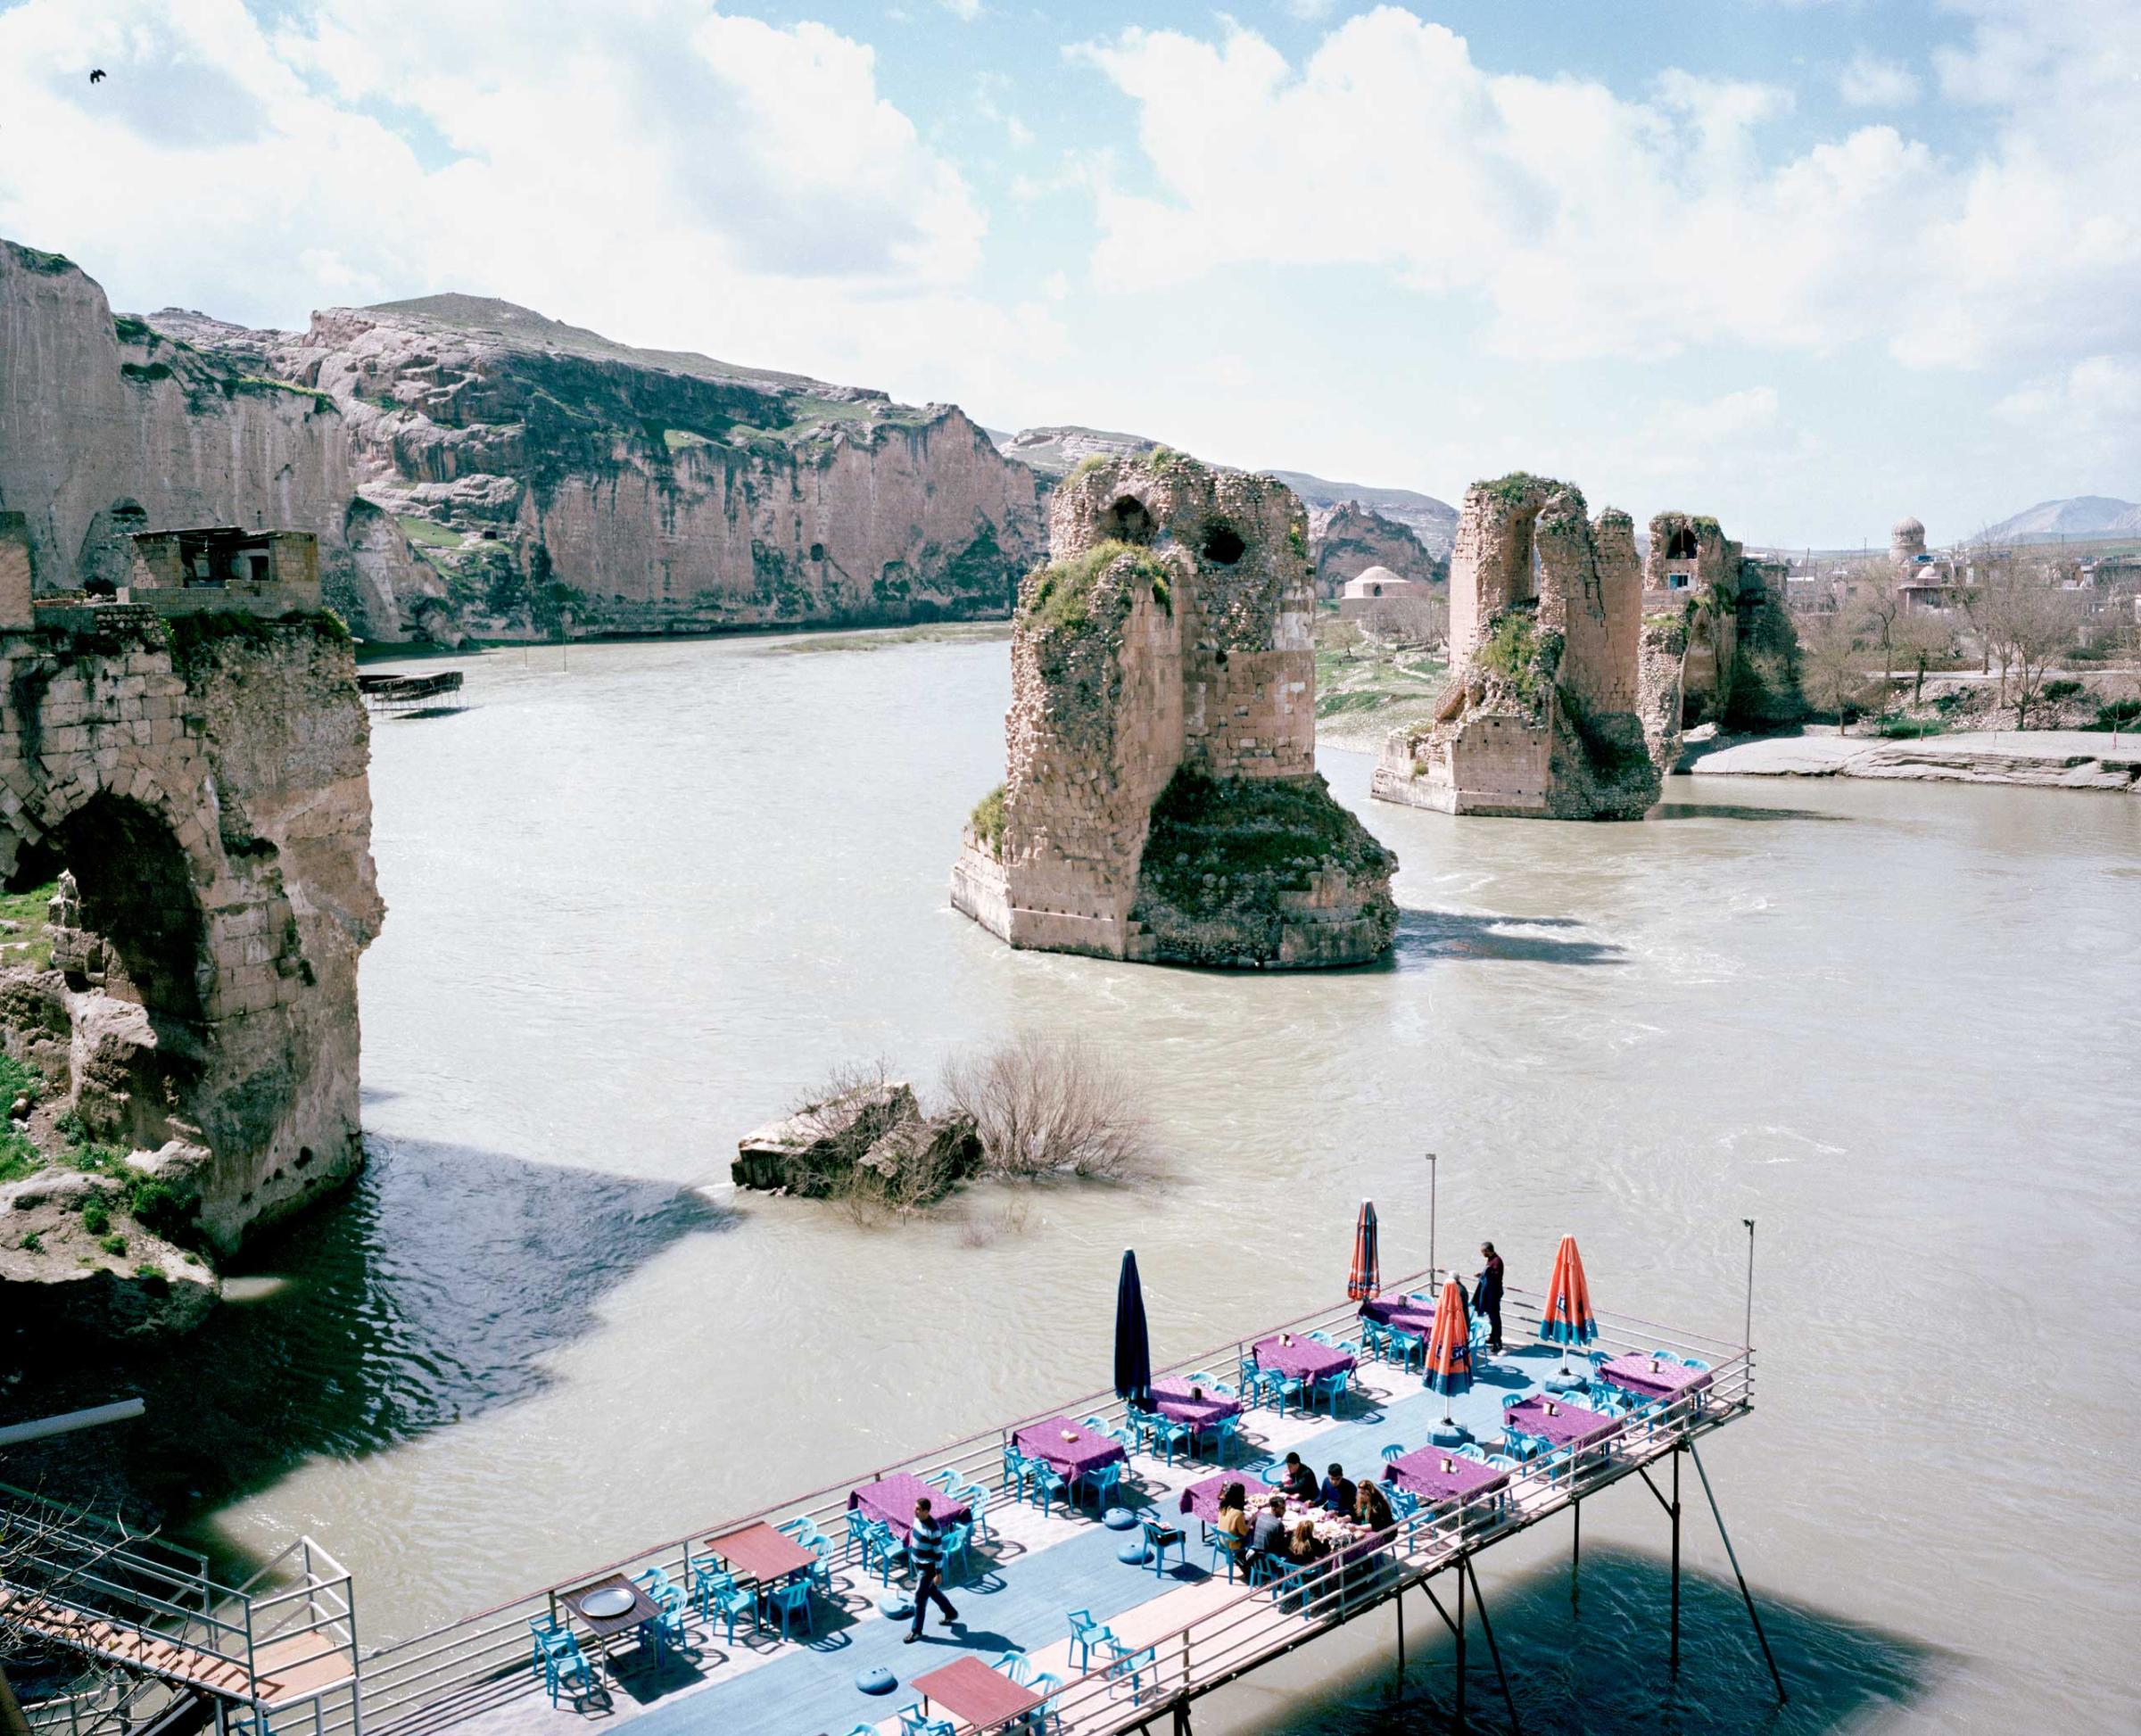 The view from the terrace of a restaurant above the Tigris River. Hasankeyf, Turkey.